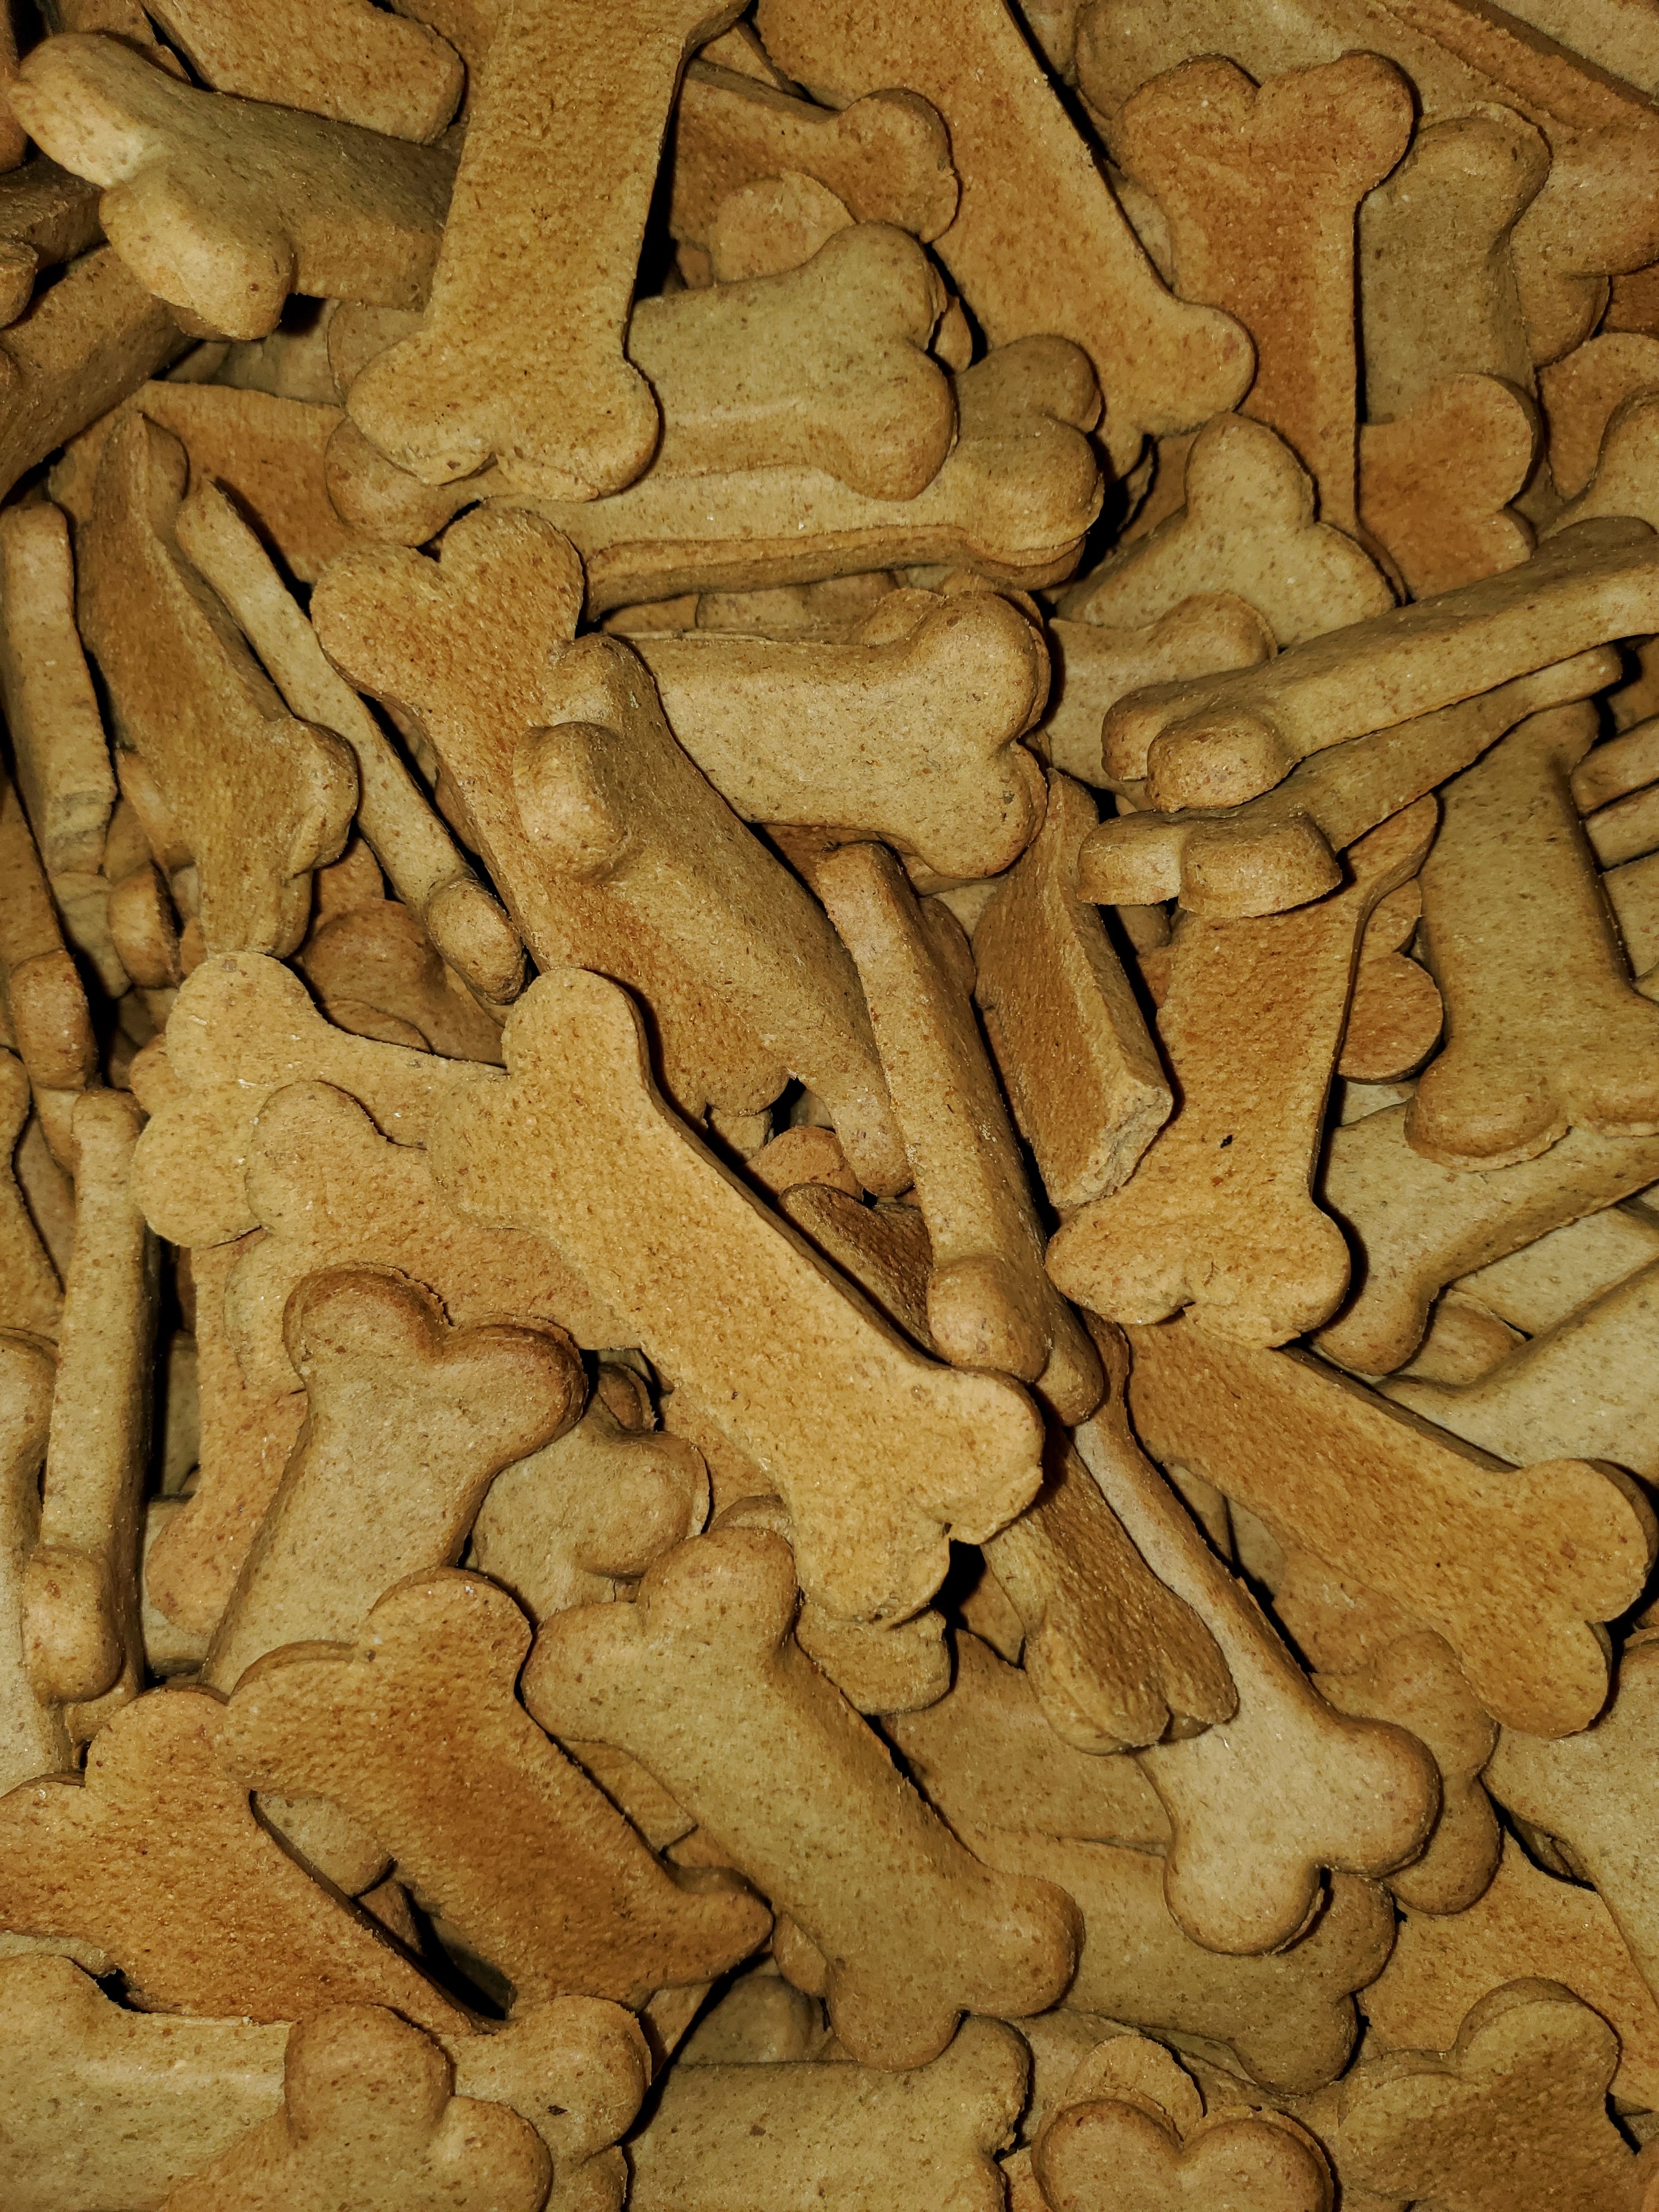 Roasted Peanut Dog biscuits by the pound